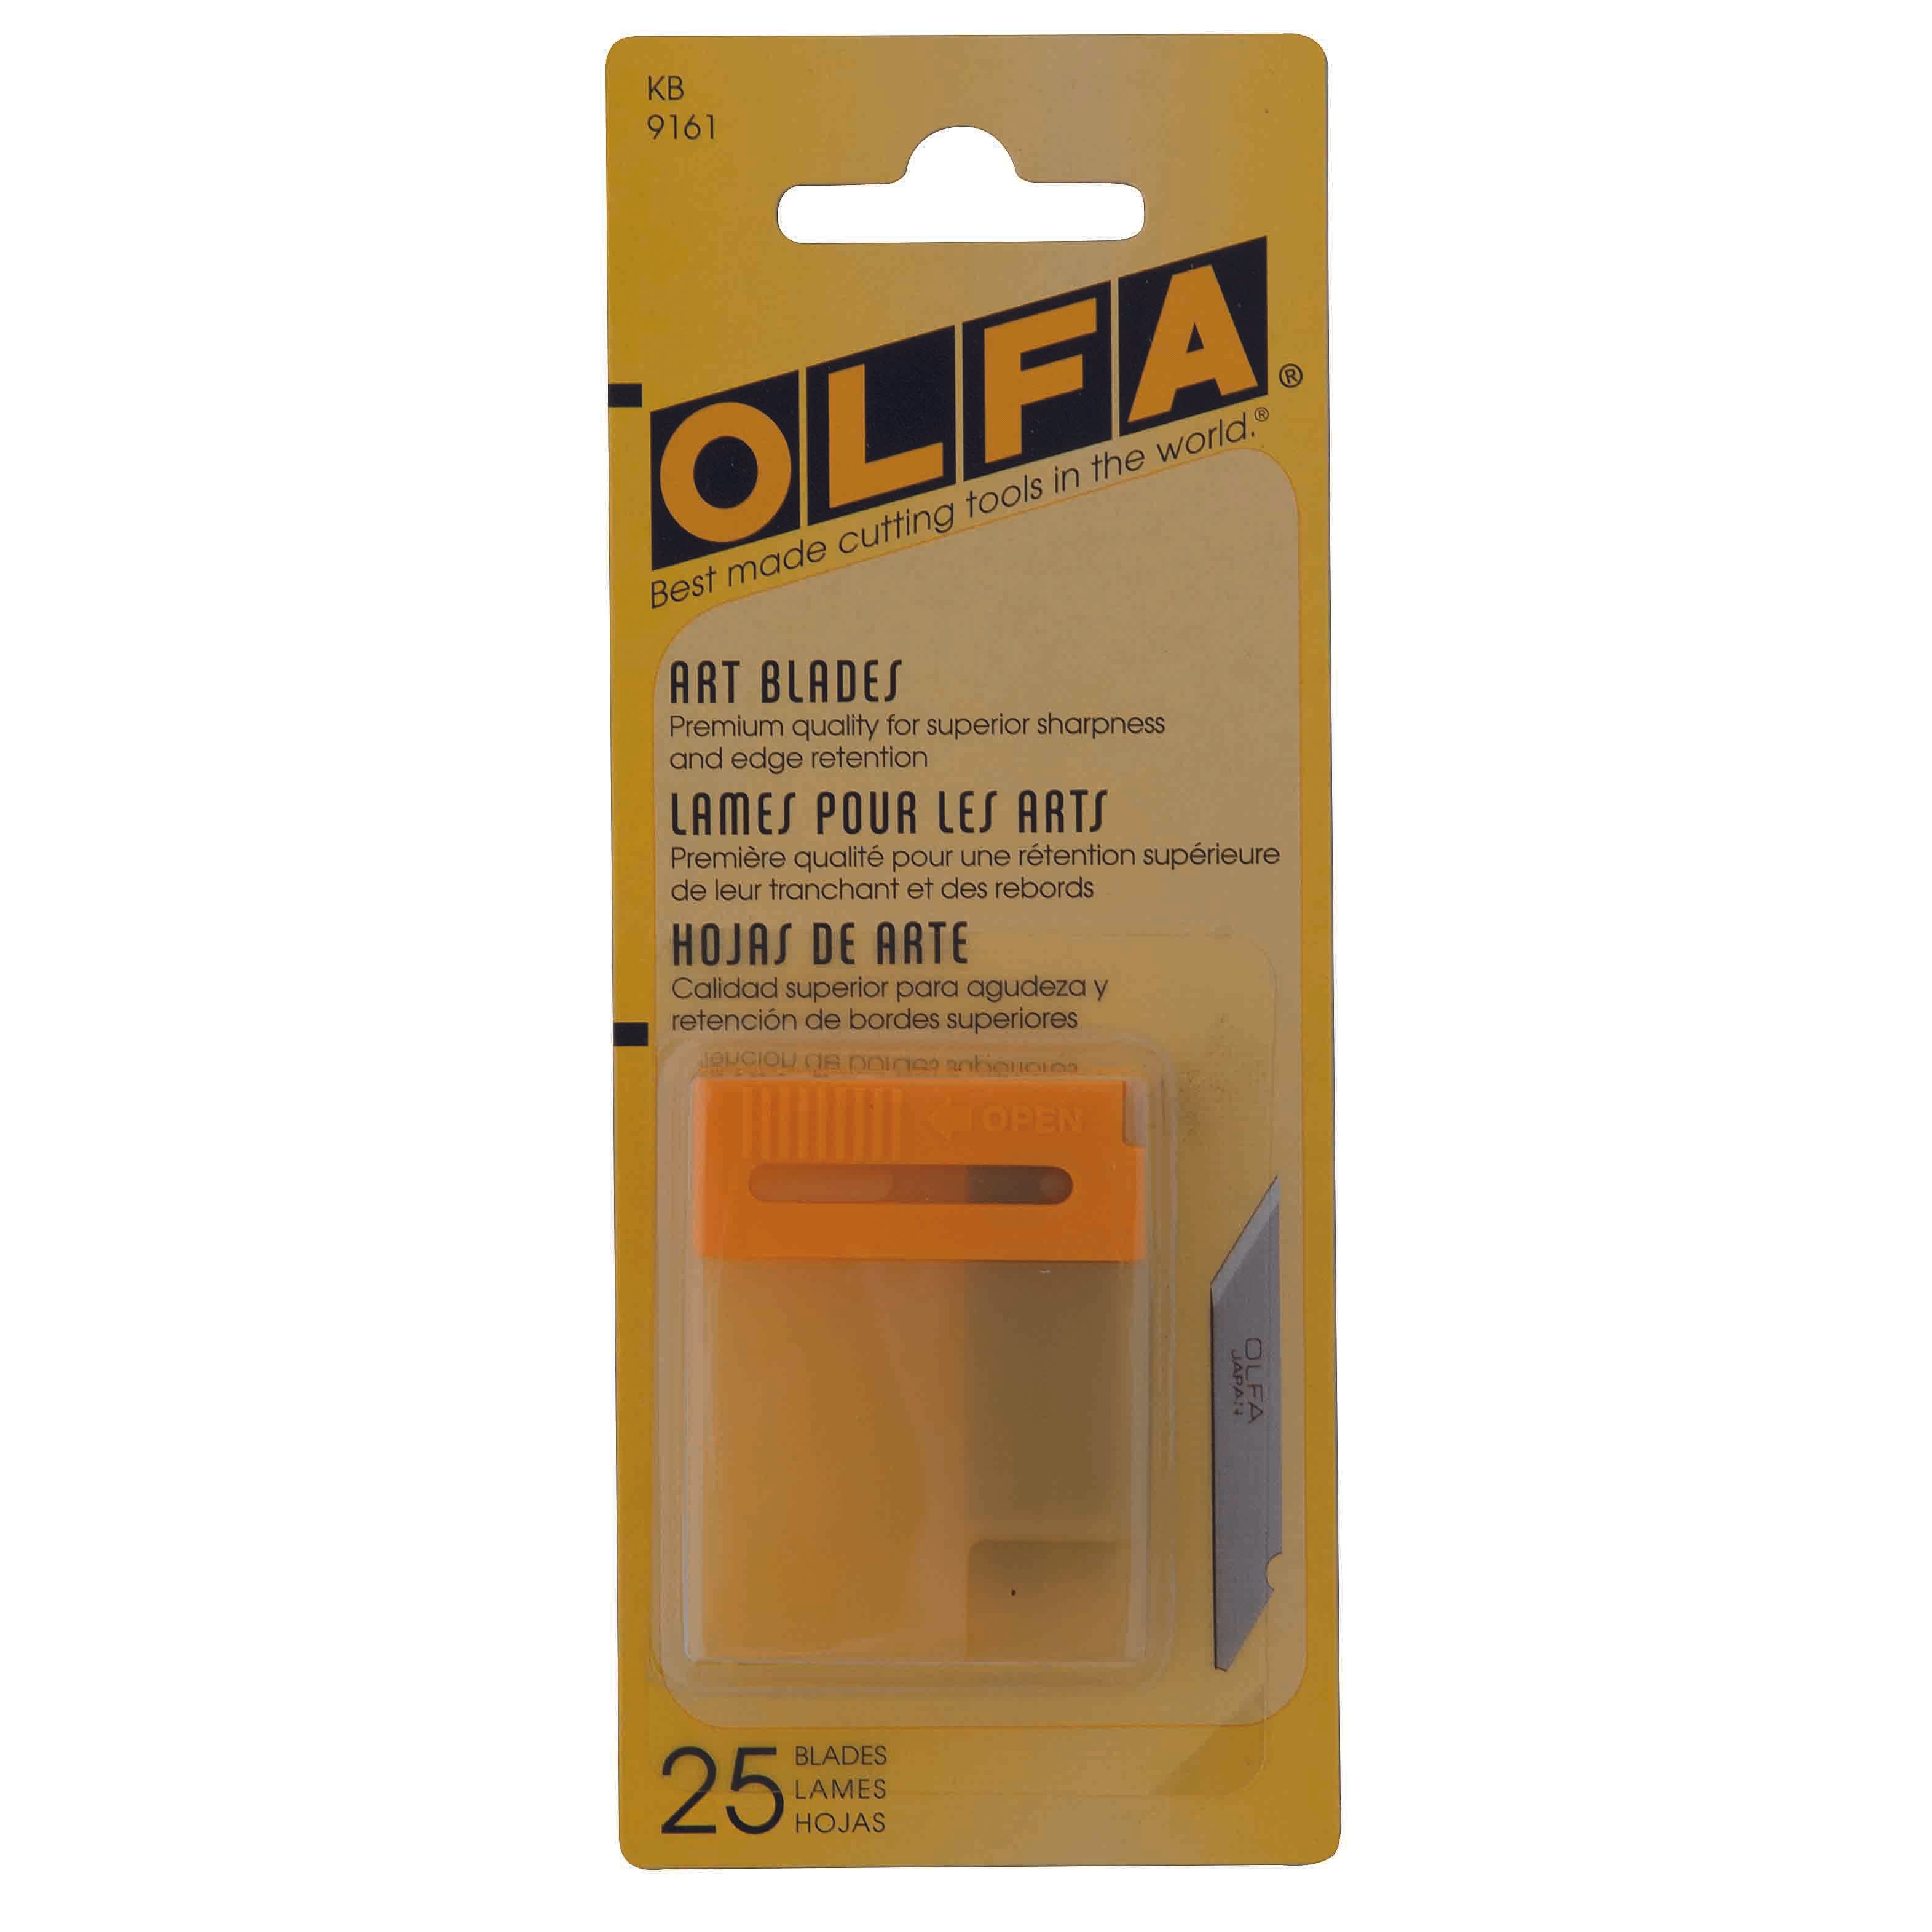 Olfa® Art Knife Replacement Blades, 25-Pack